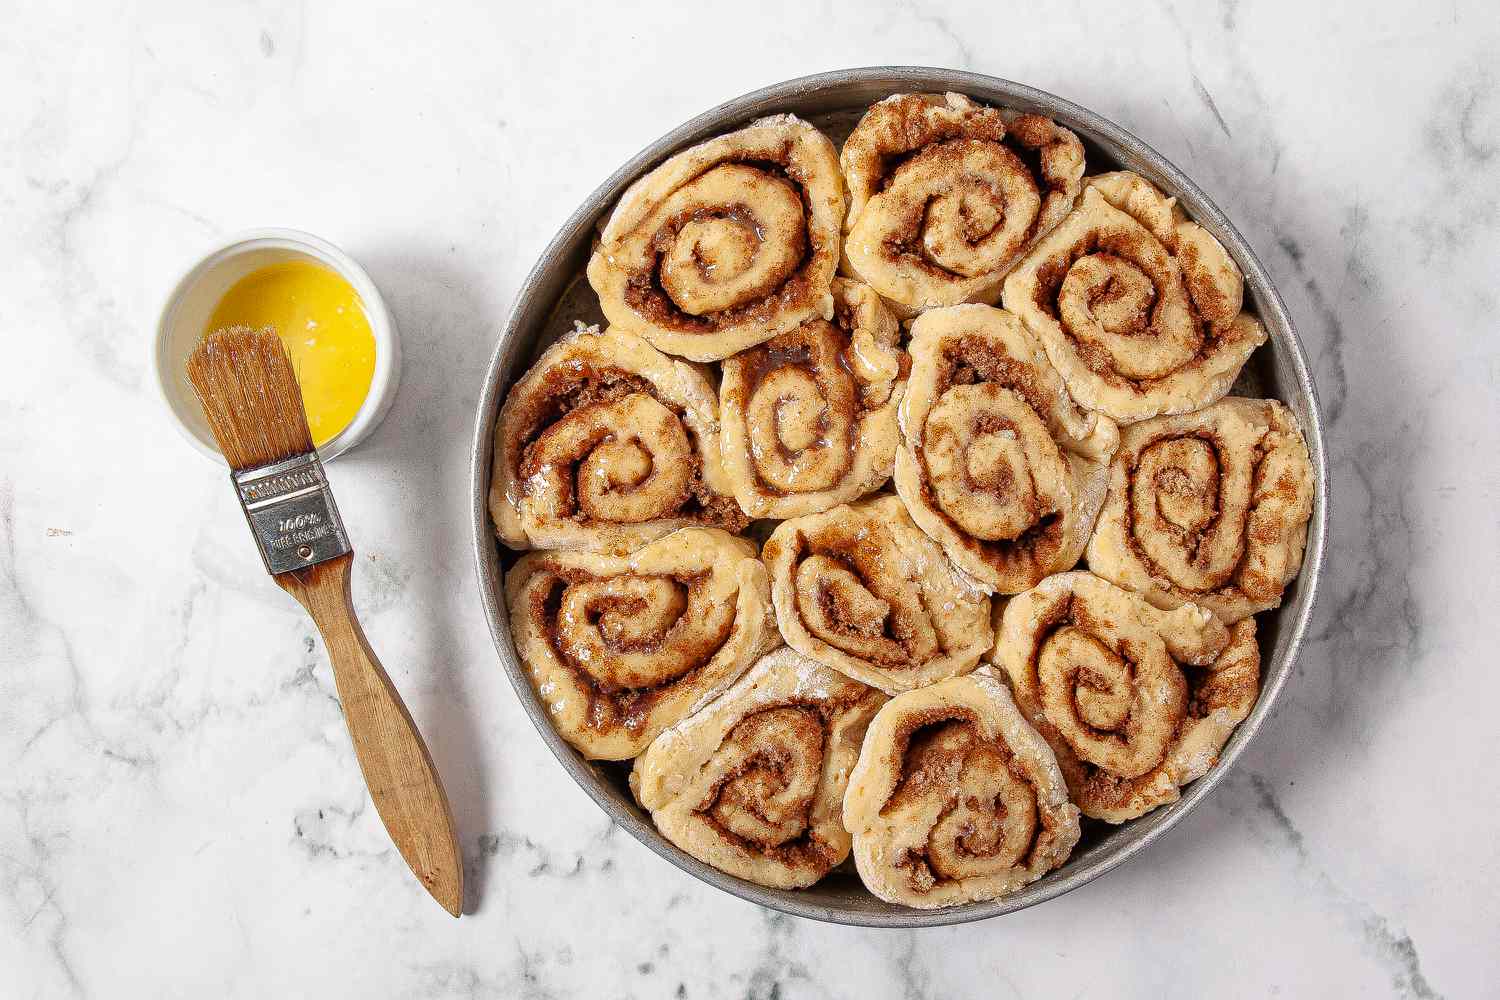 brush tops of cinnamon rolls with butter